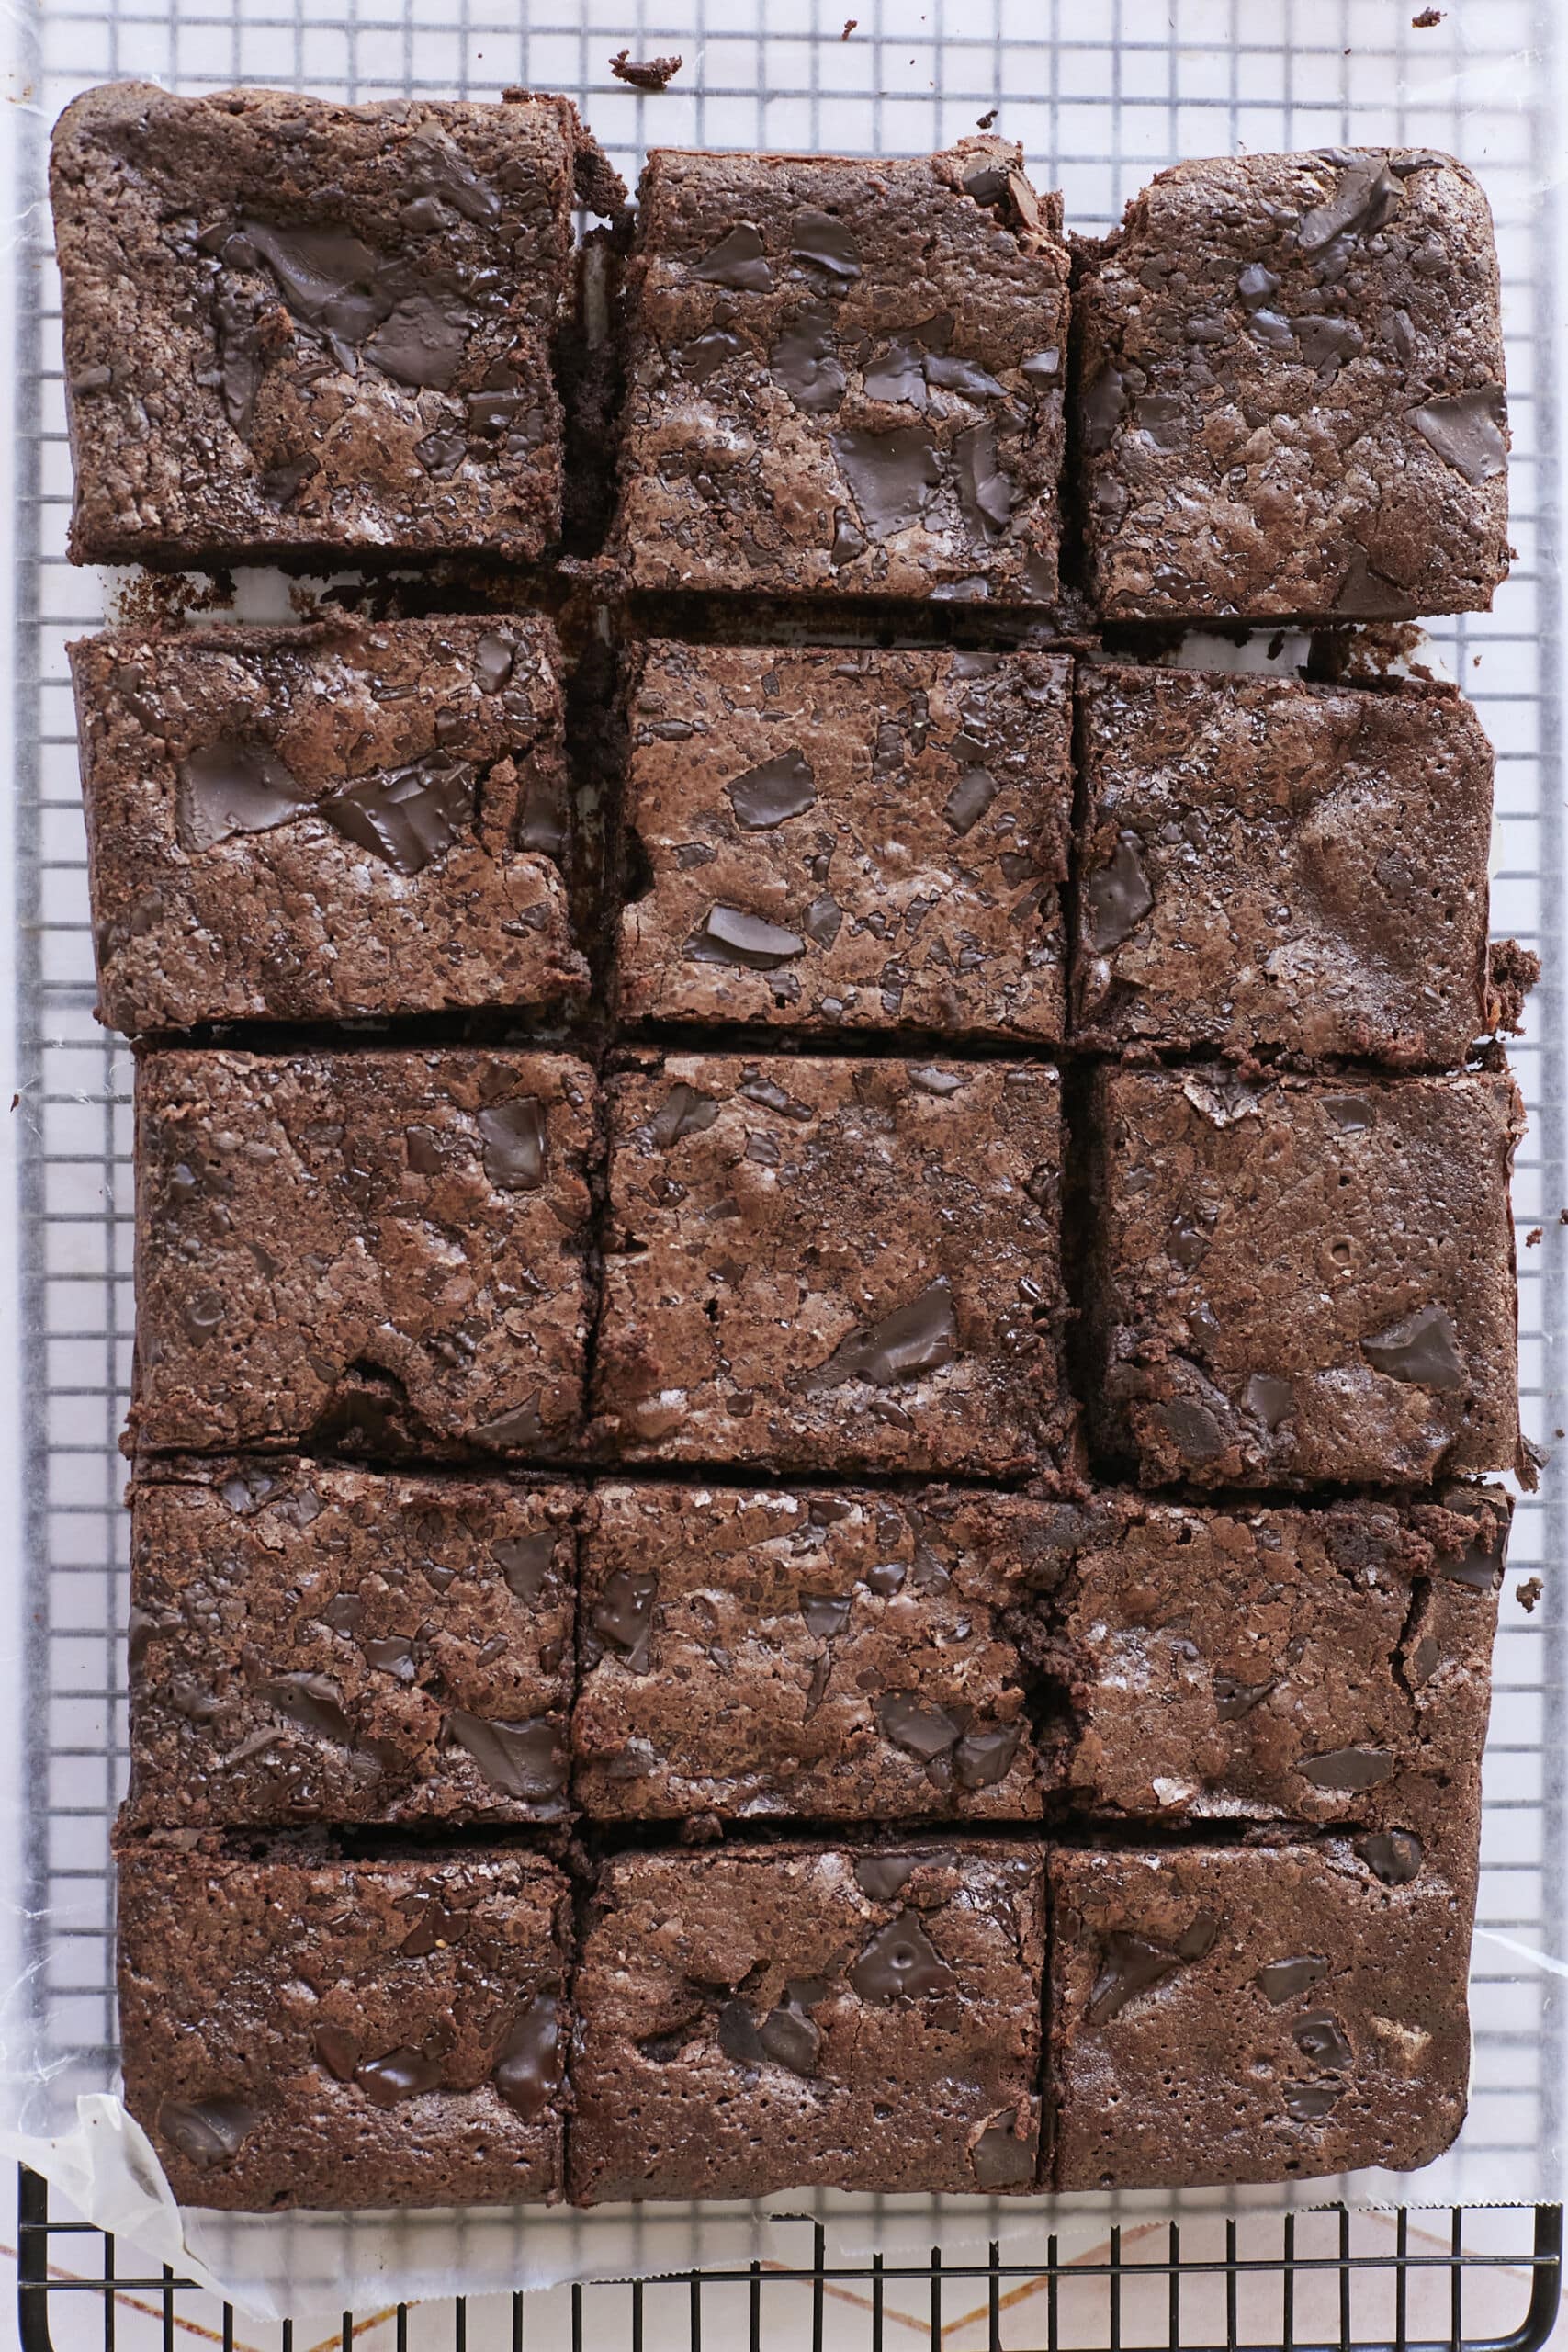 Gluten-Free Almond Flour Brownies are cut into 15b big squares, cooling on the wire rack. They're loaded with chunks of chocolate and have shinny, crinkly top. 